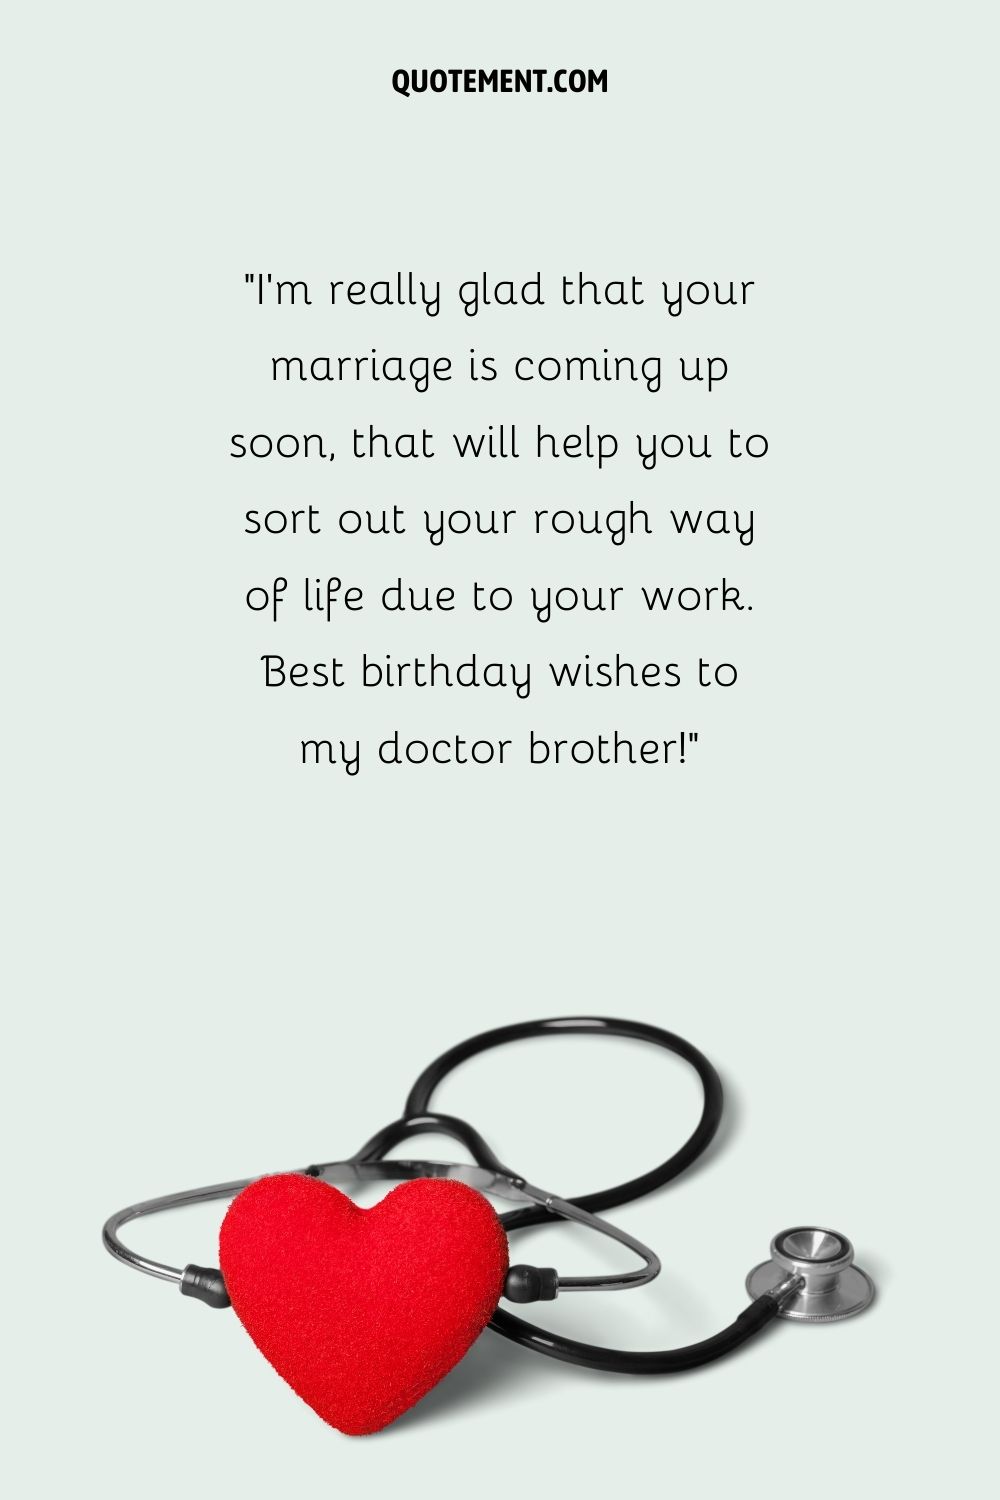 younger brother doctor wish represented by stethoscope